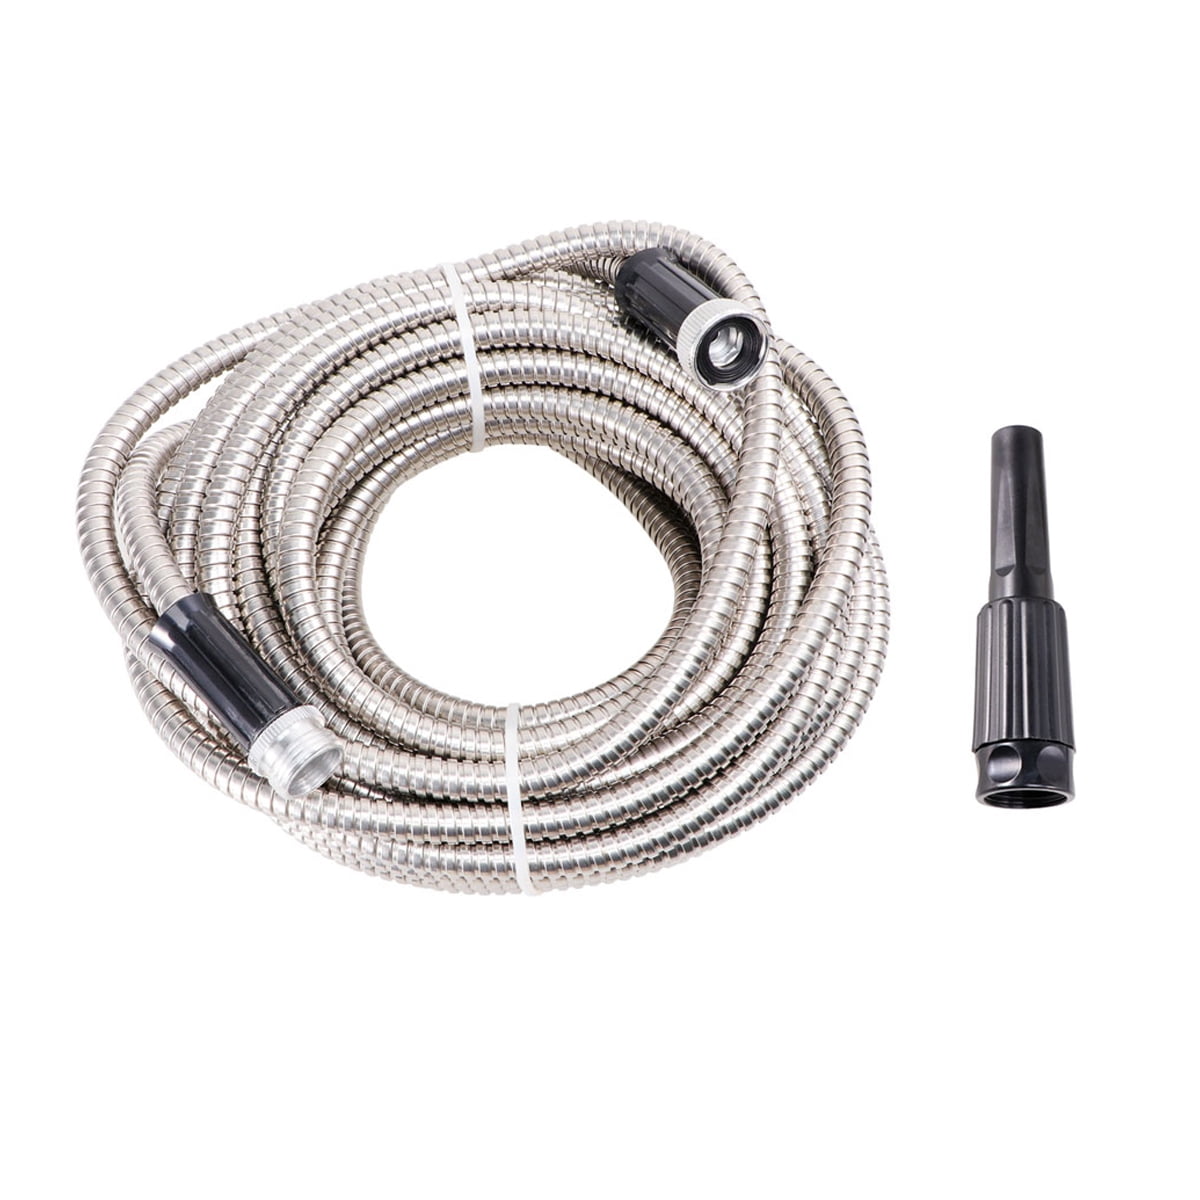 Details about   Weather Resistant Stainless Steel Watering Hose w Fire Nozzle Outdoor 50' or 100 